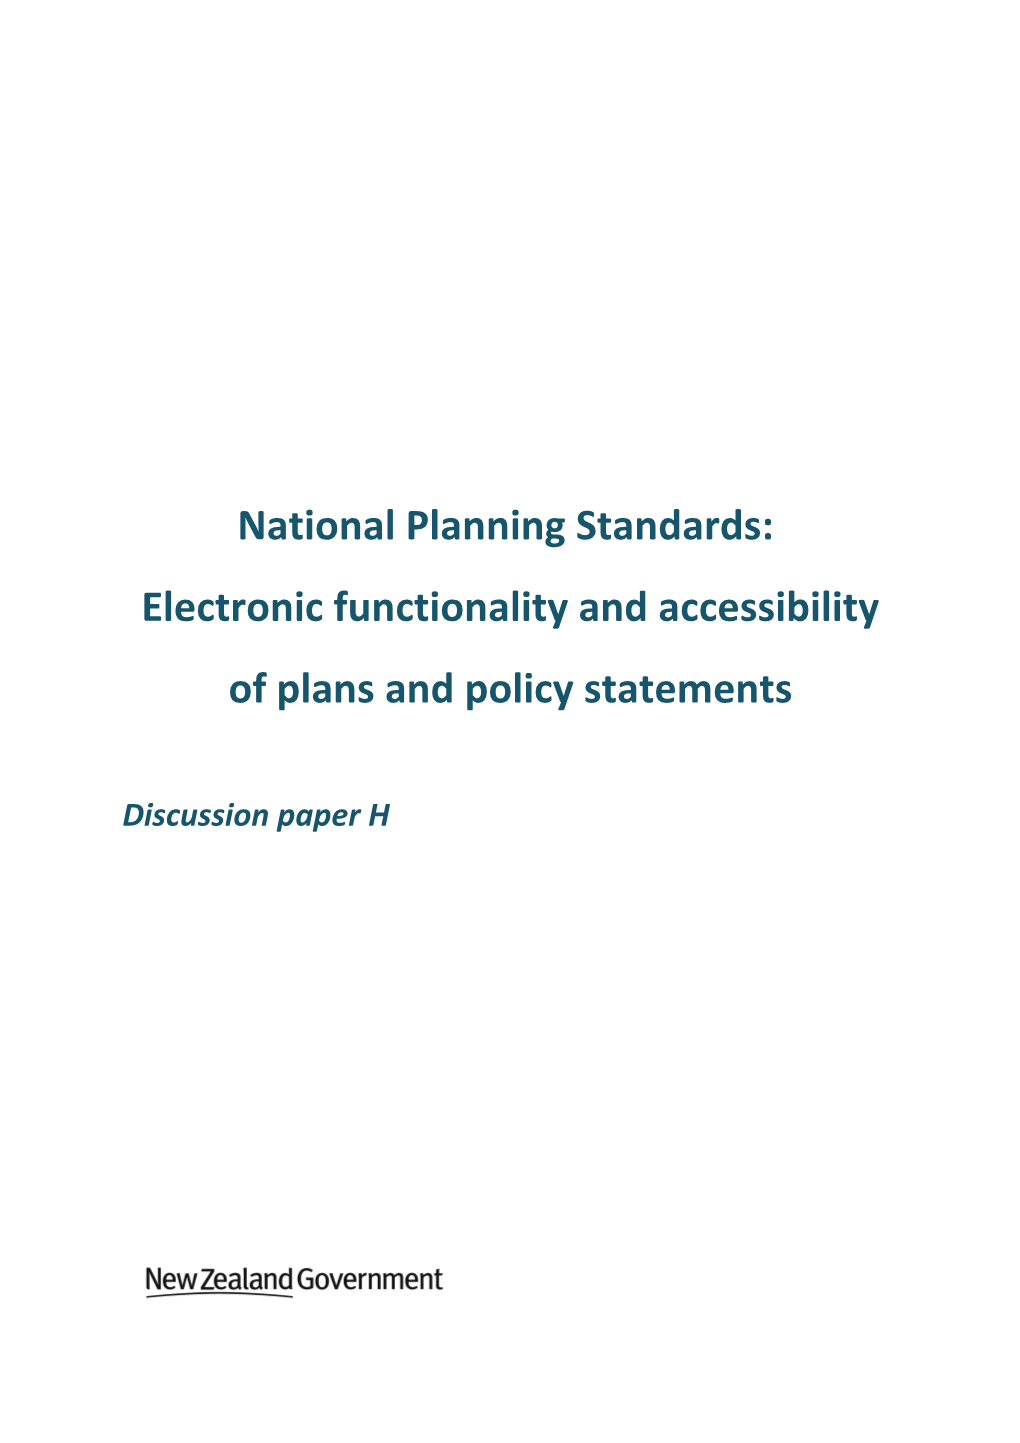 National Planning Standards: Electronic Functionality and Accessibility of Plans and Policy